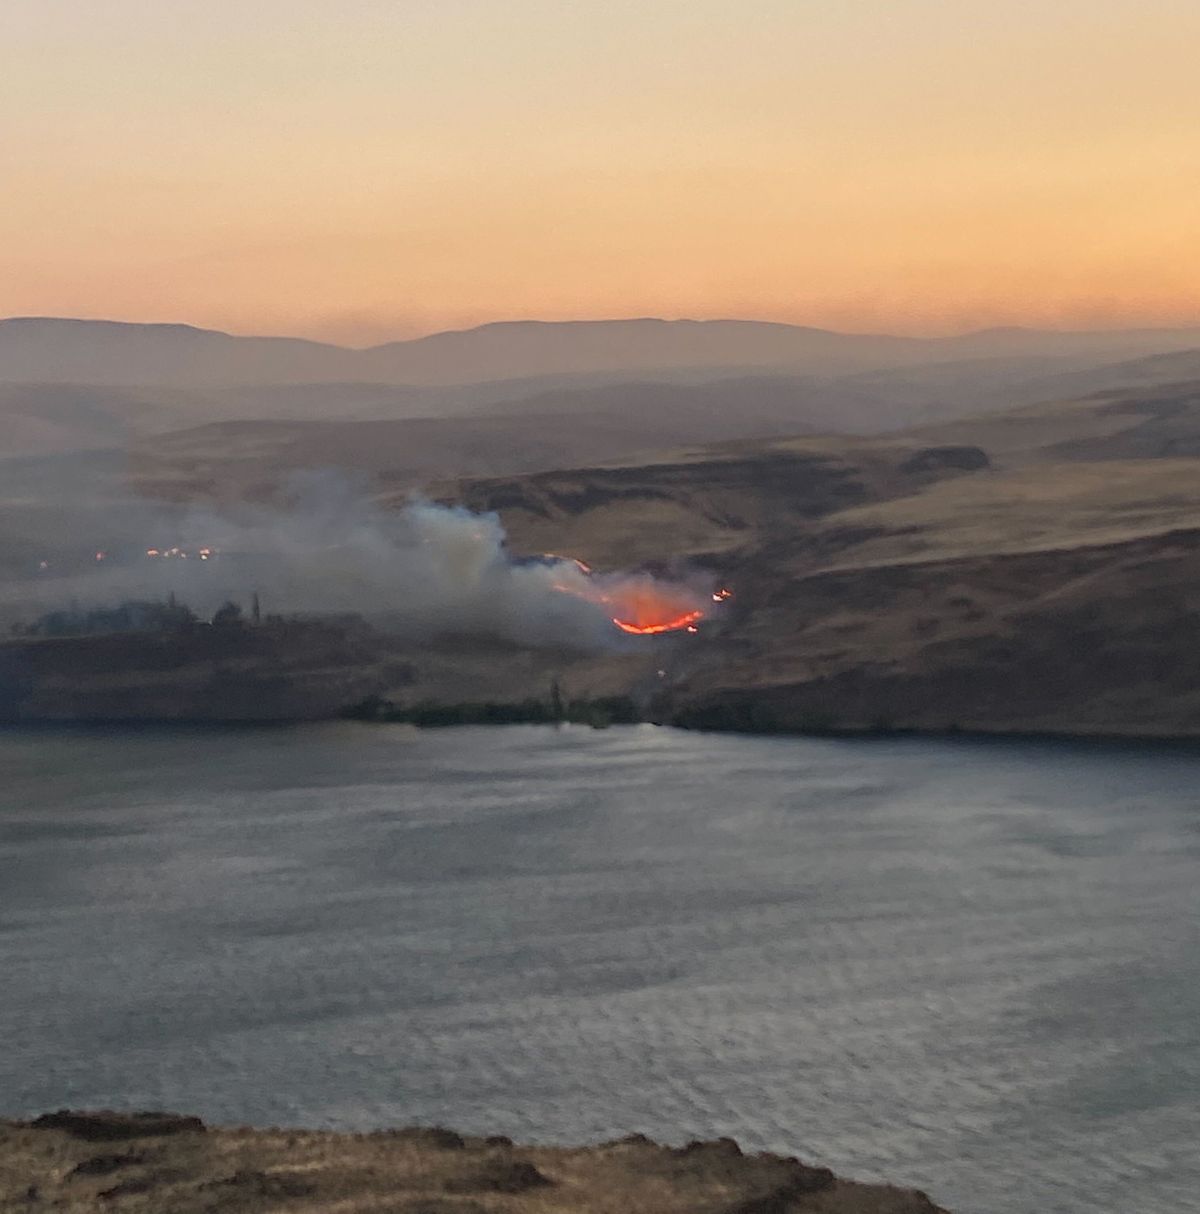 The Vantage Highway fire burns on the west bank of the Columbia River in Vantage, Wash., seen Monday night from Interstate 90 in George, Wash.  (Mathew Callaghan/The Spokesman-Review)